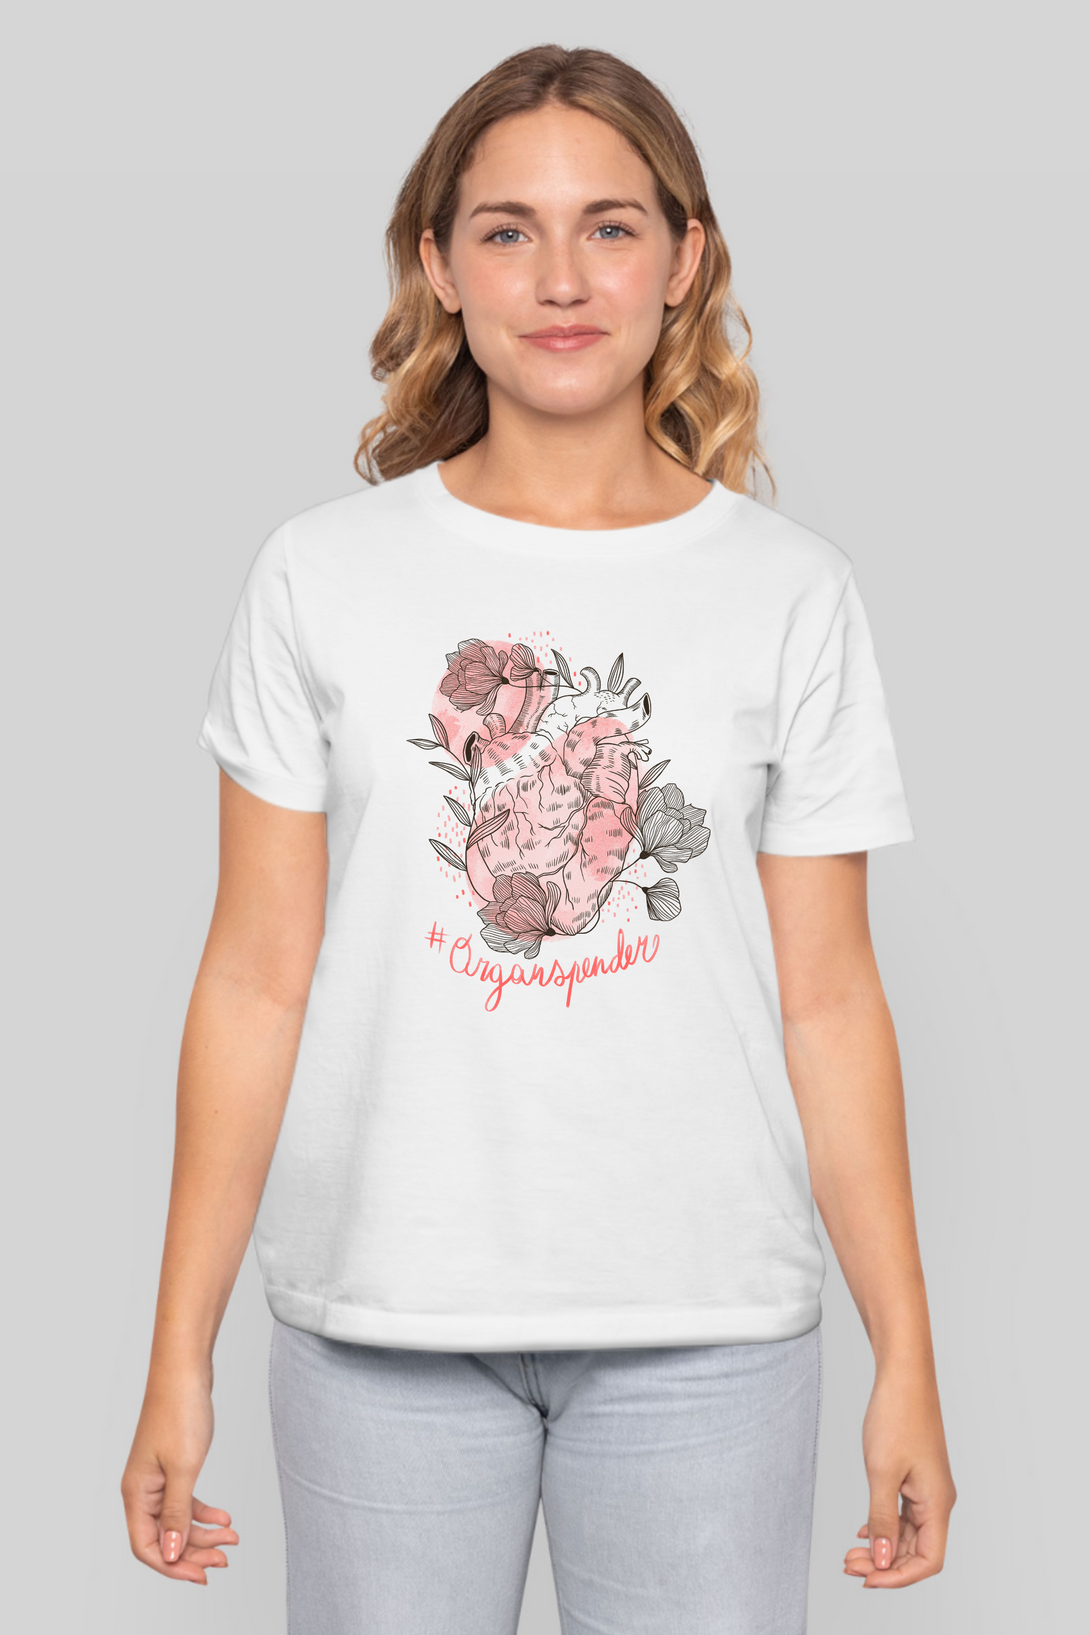 Blossoming Love Printed T-Shirt For Women - WowWaves - 6